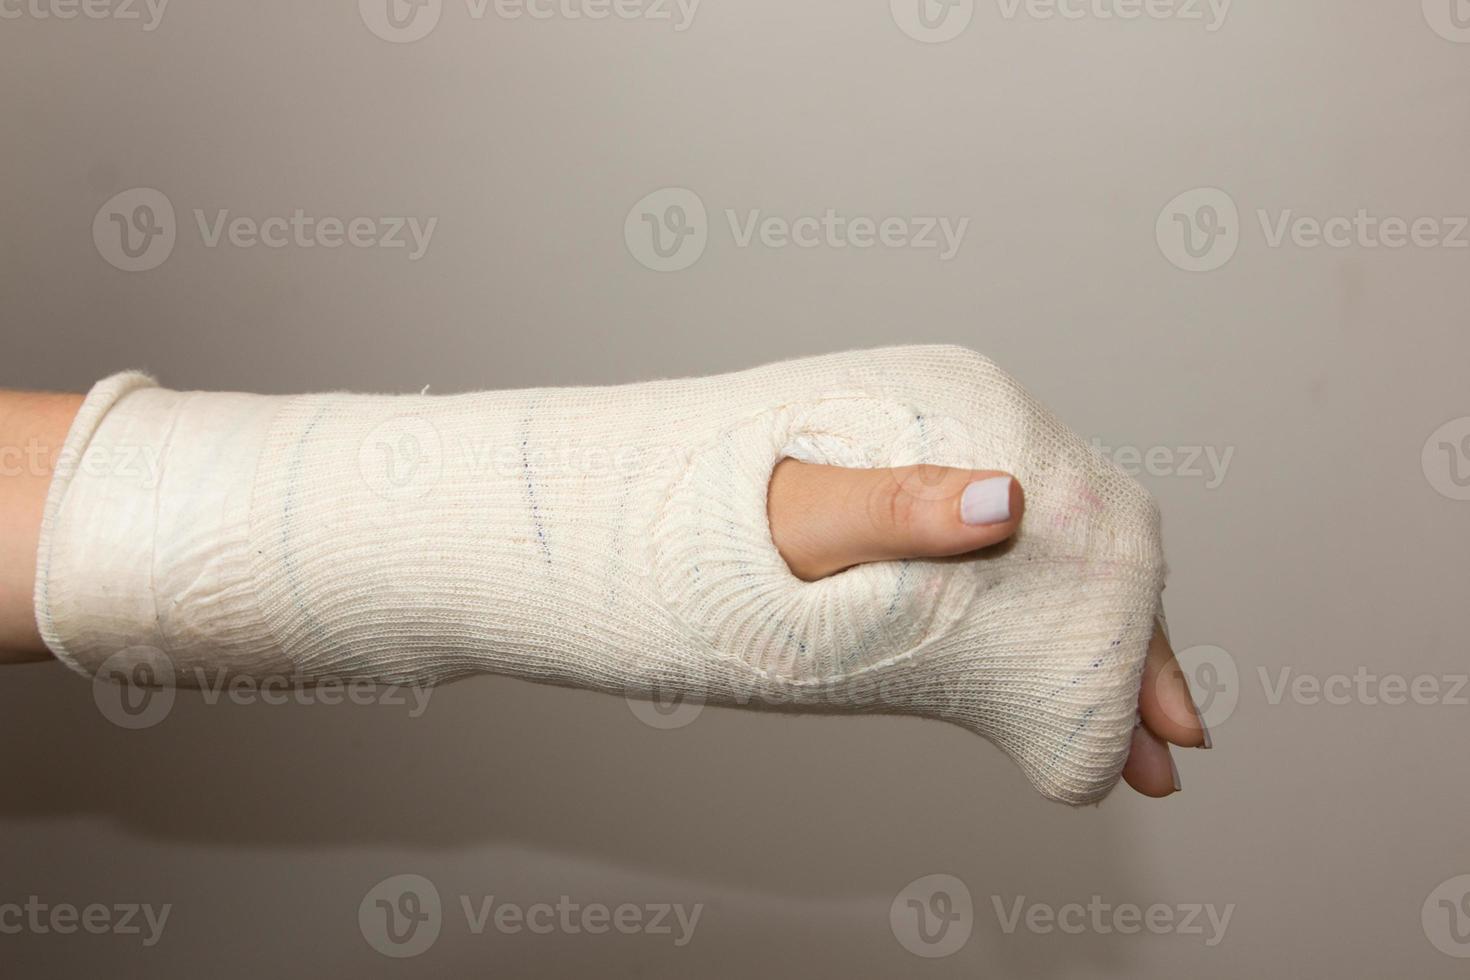 Lady with a Broken Hand and Wrist wrapped in a cast photo